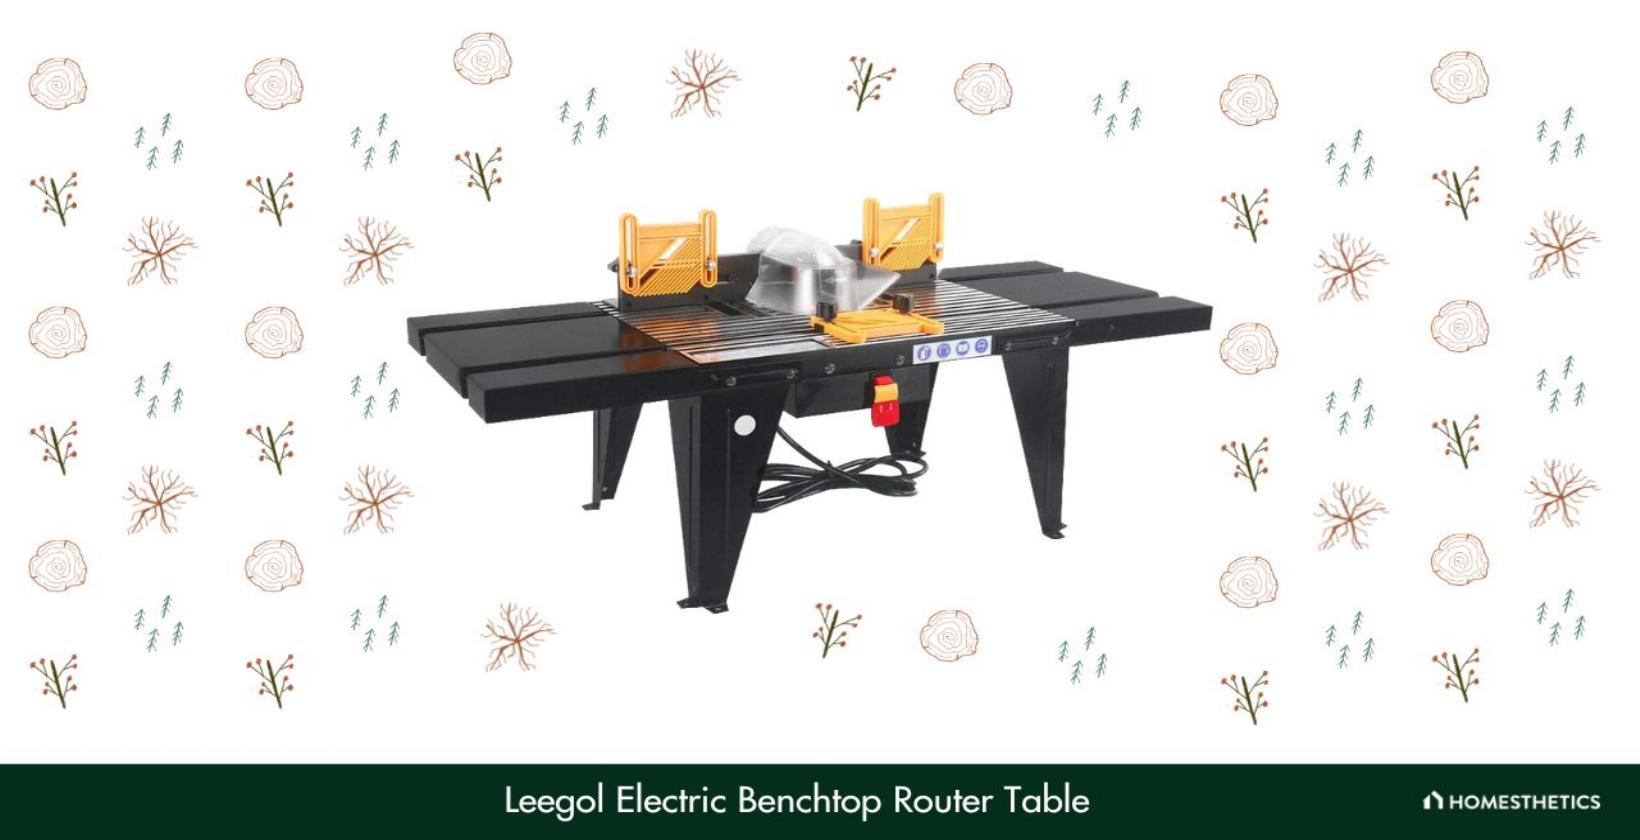 8. Leegol Electric Benchtop Router Table